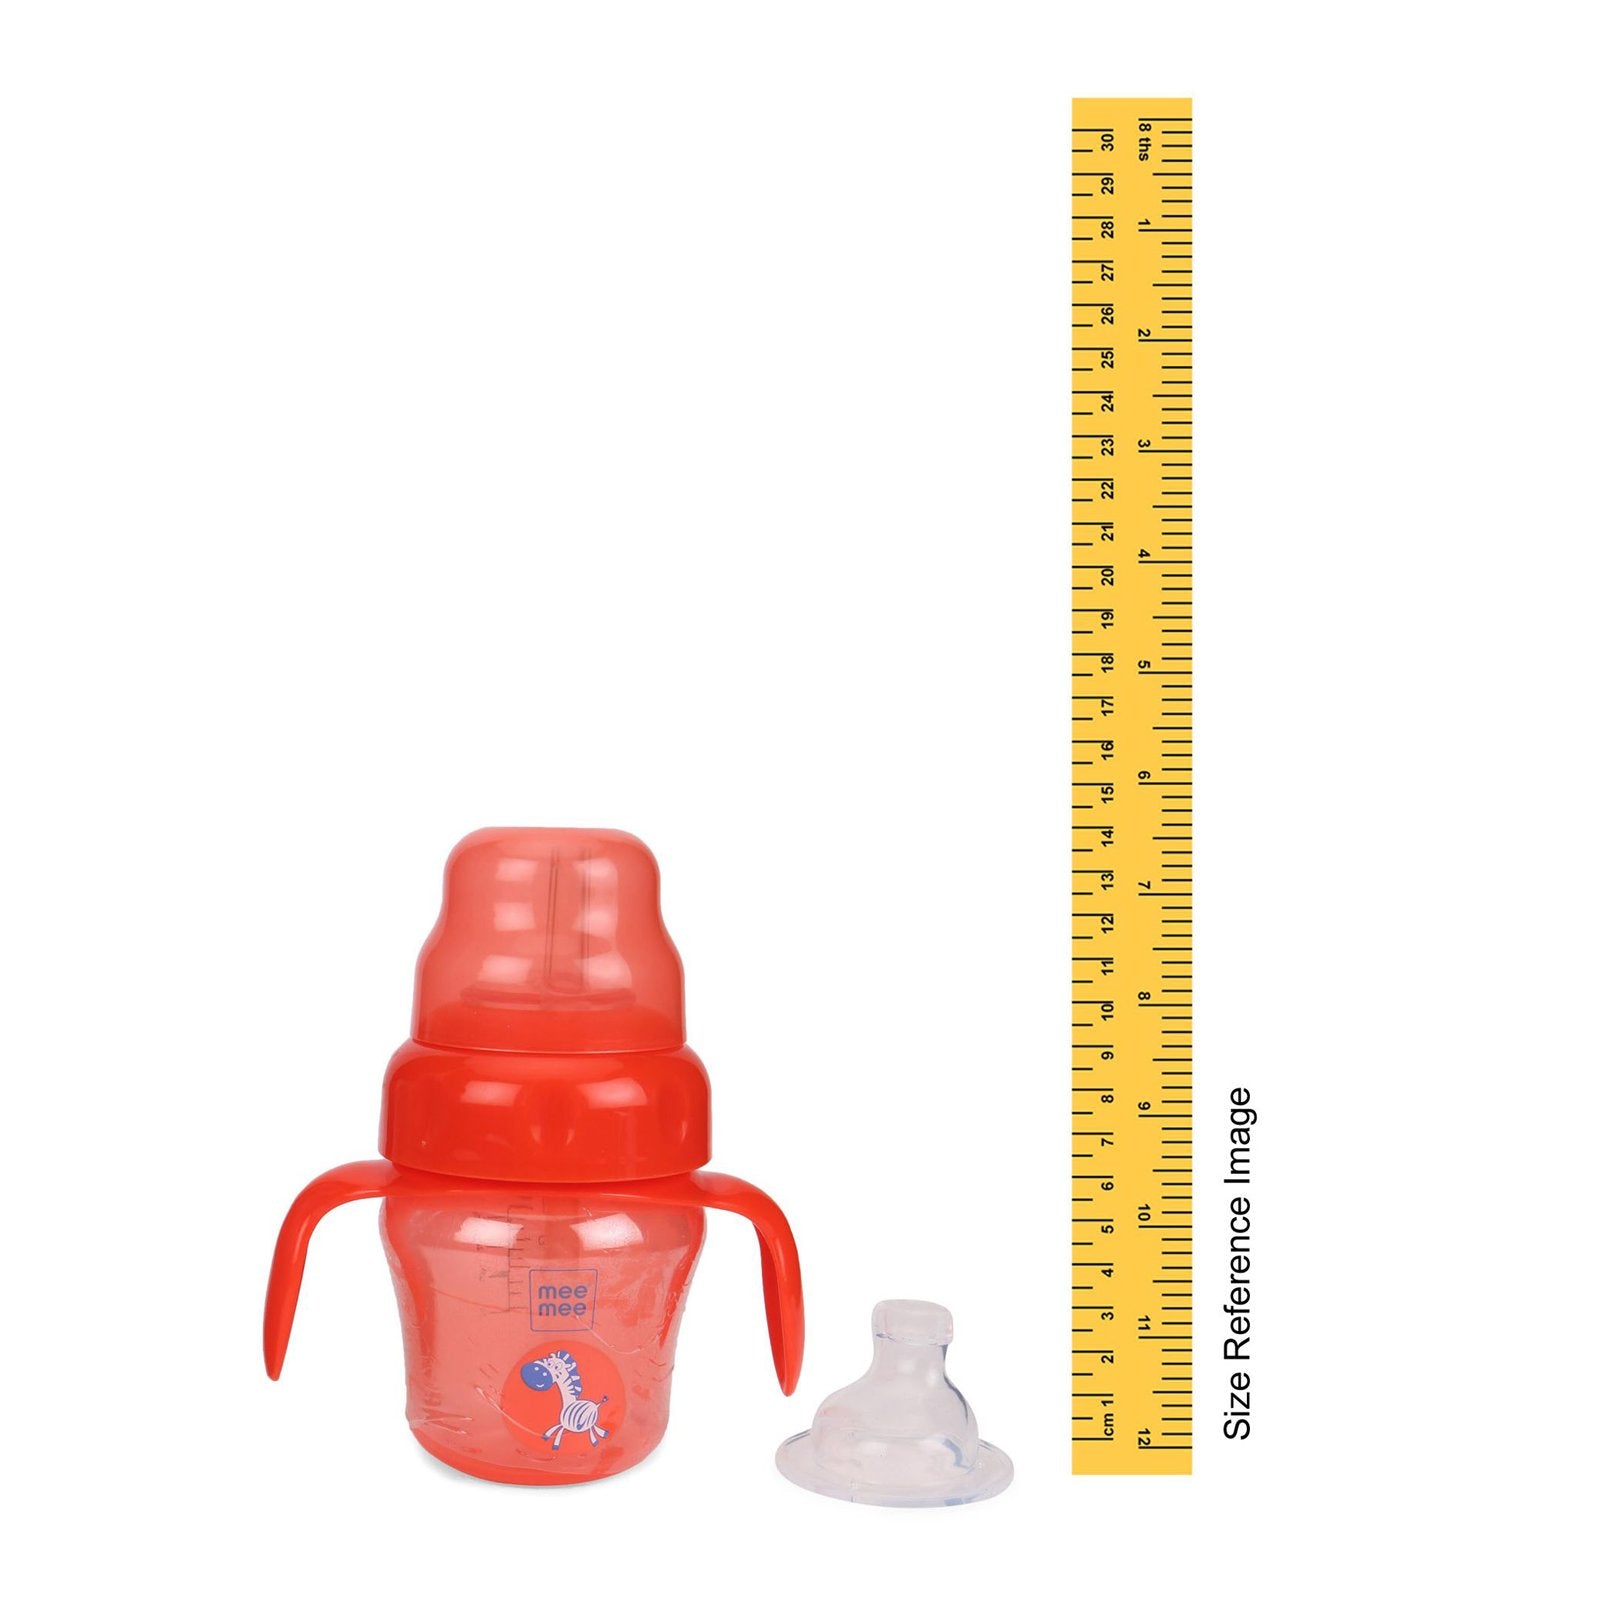 MEE MEE 2 in 1 Spout & straw Sipper Cup 150ml 3m+Age,